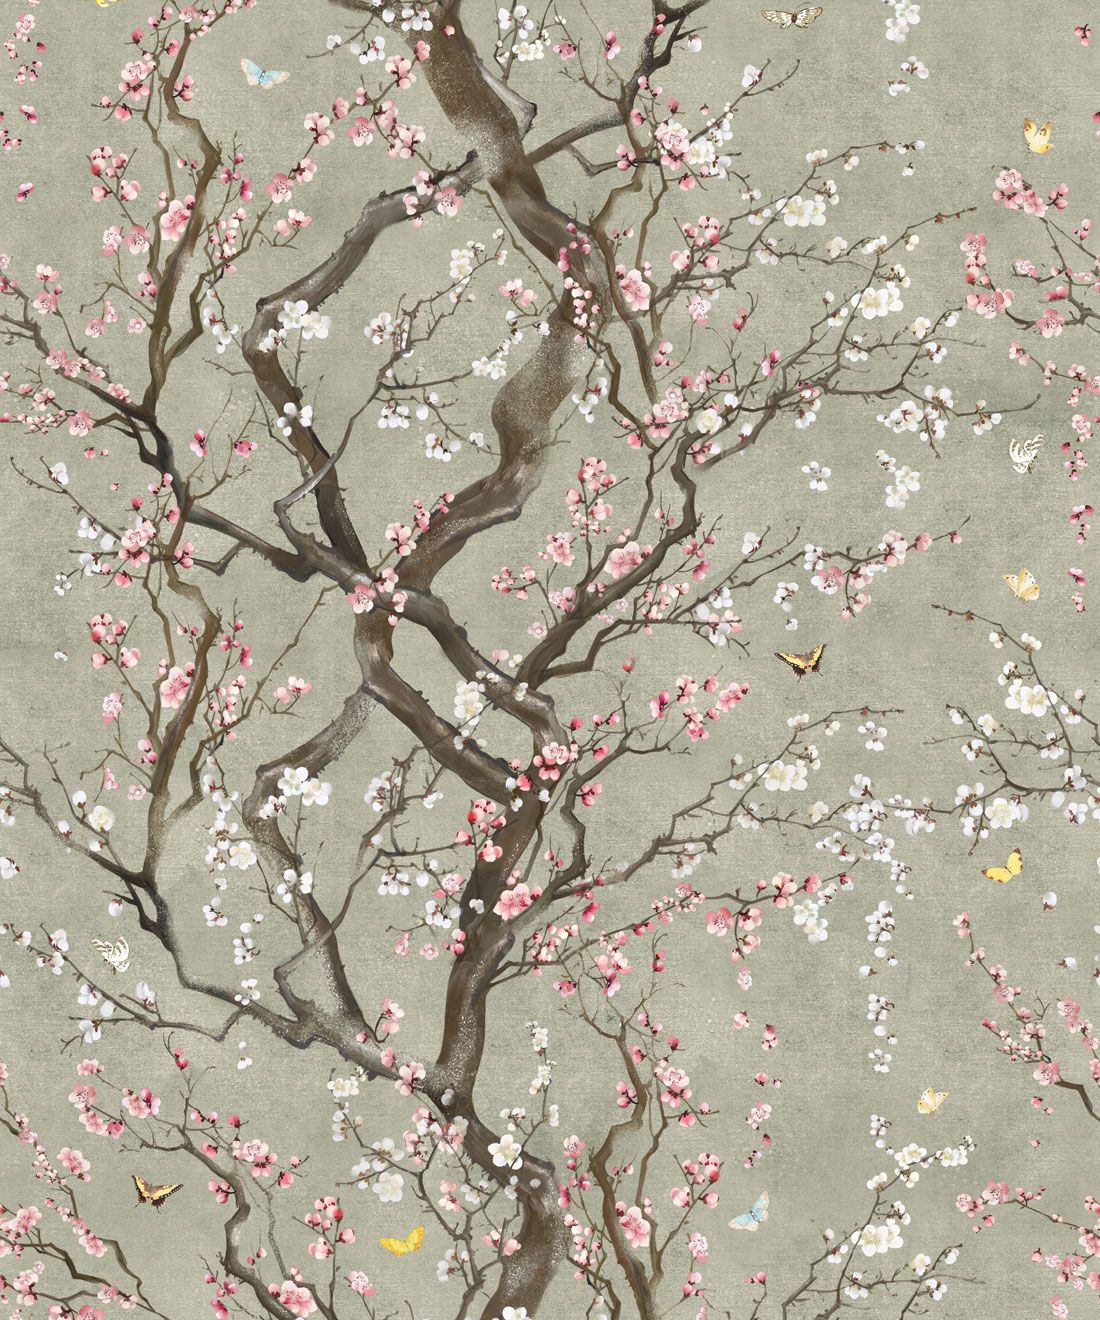 Plum Blossom in Silver is a Japanese floral wallpaper